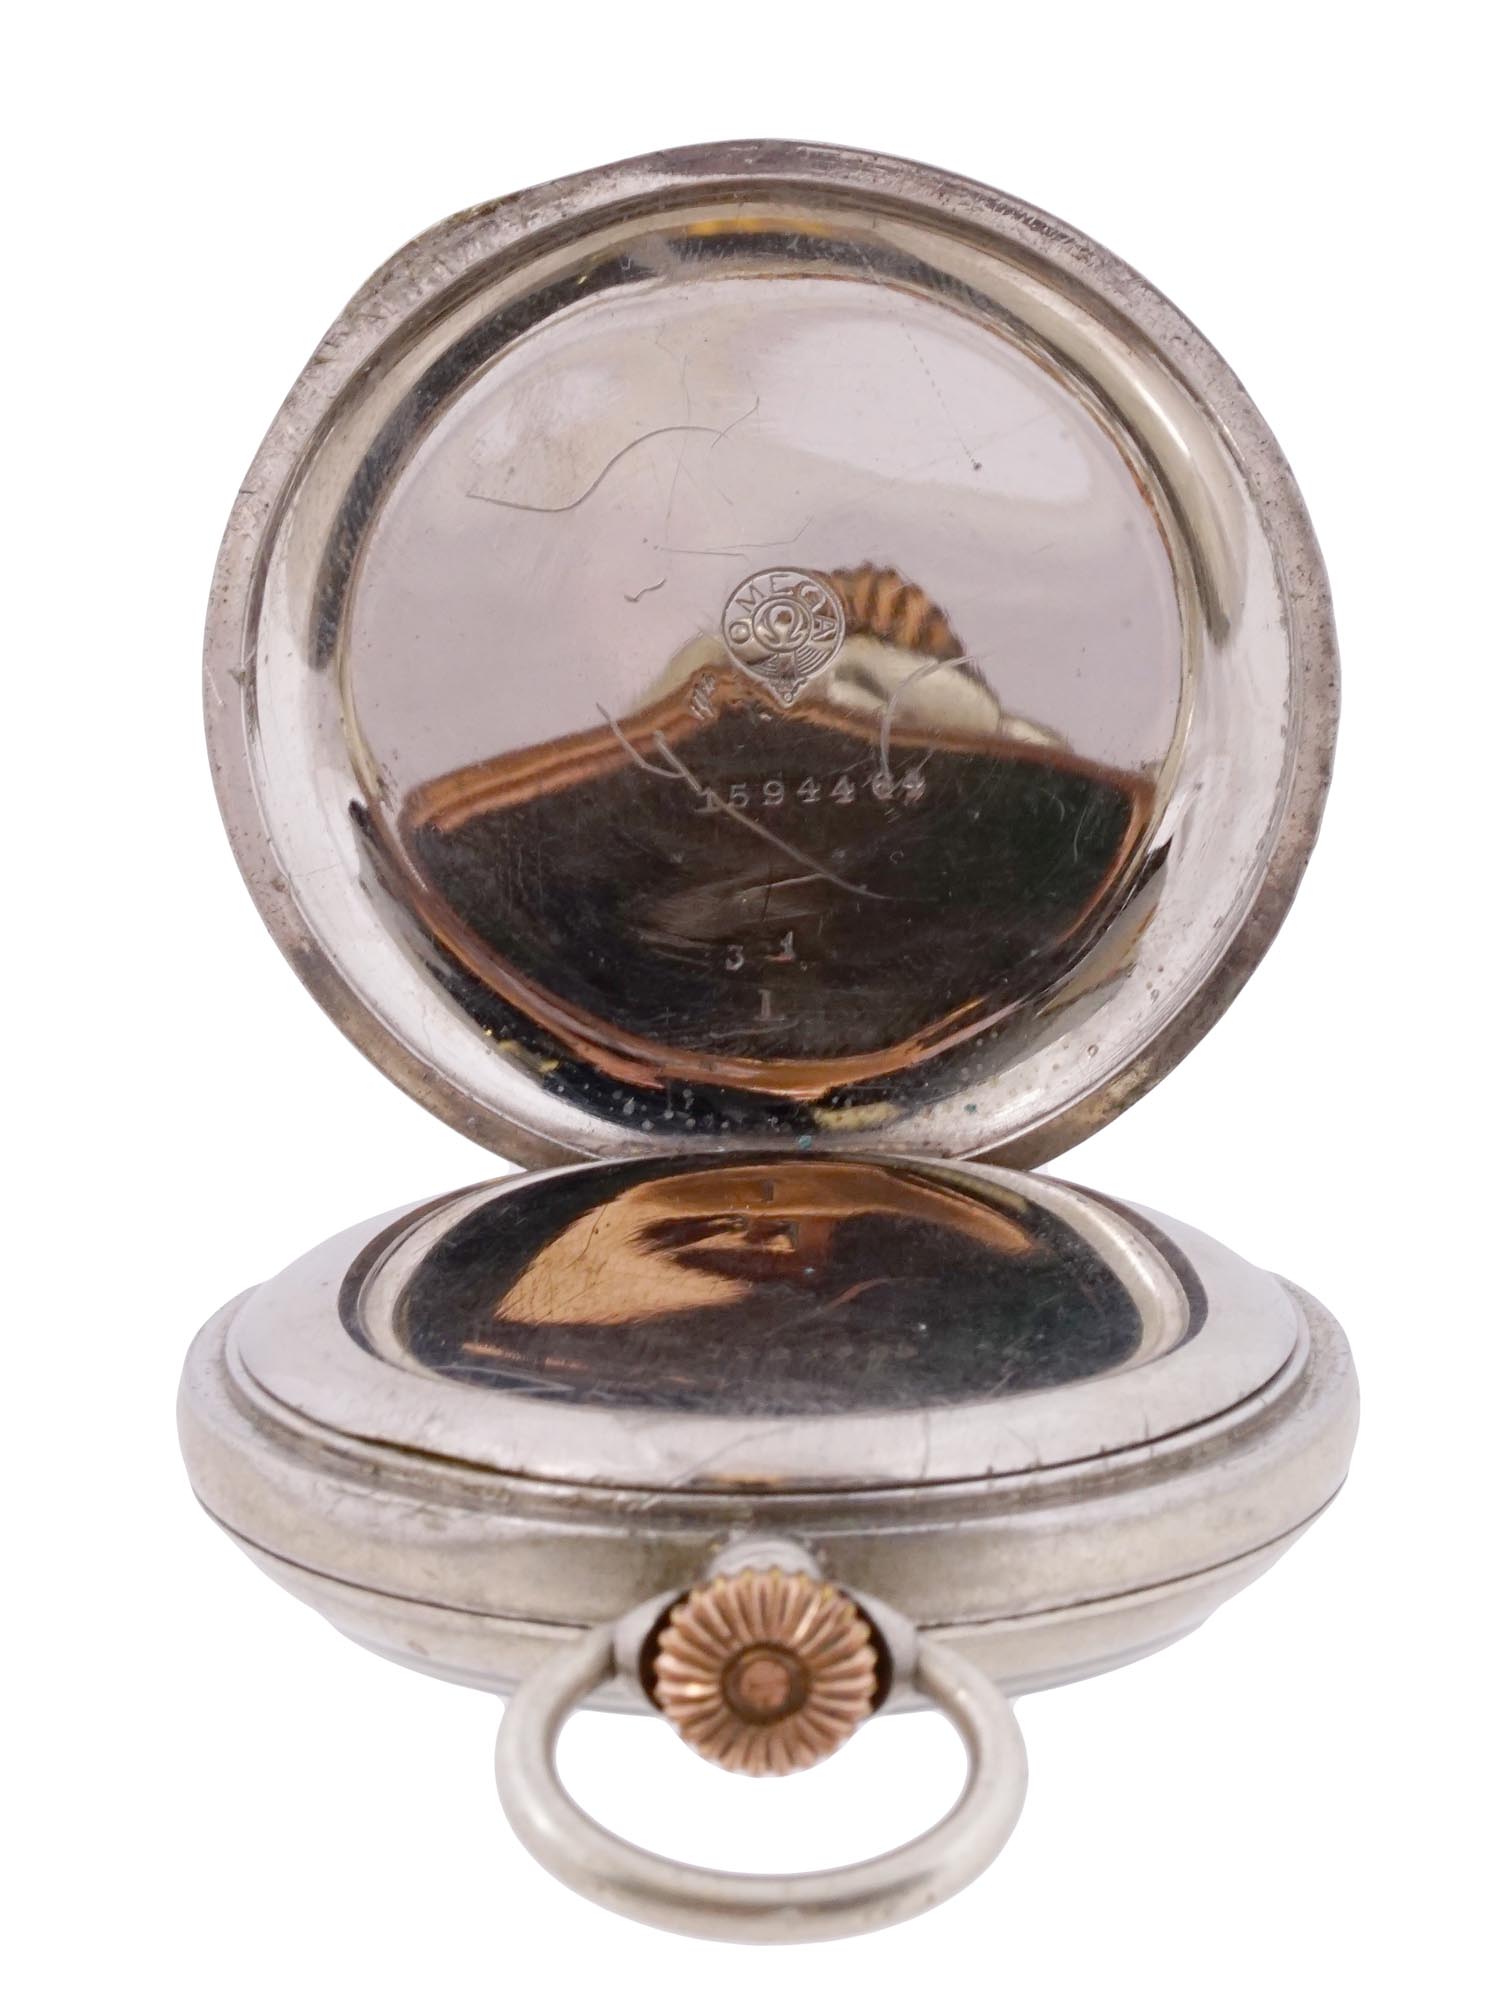 EARLY 20TH C SWISS OMEGA OPEN FACE POCKET WATCH PIC-7